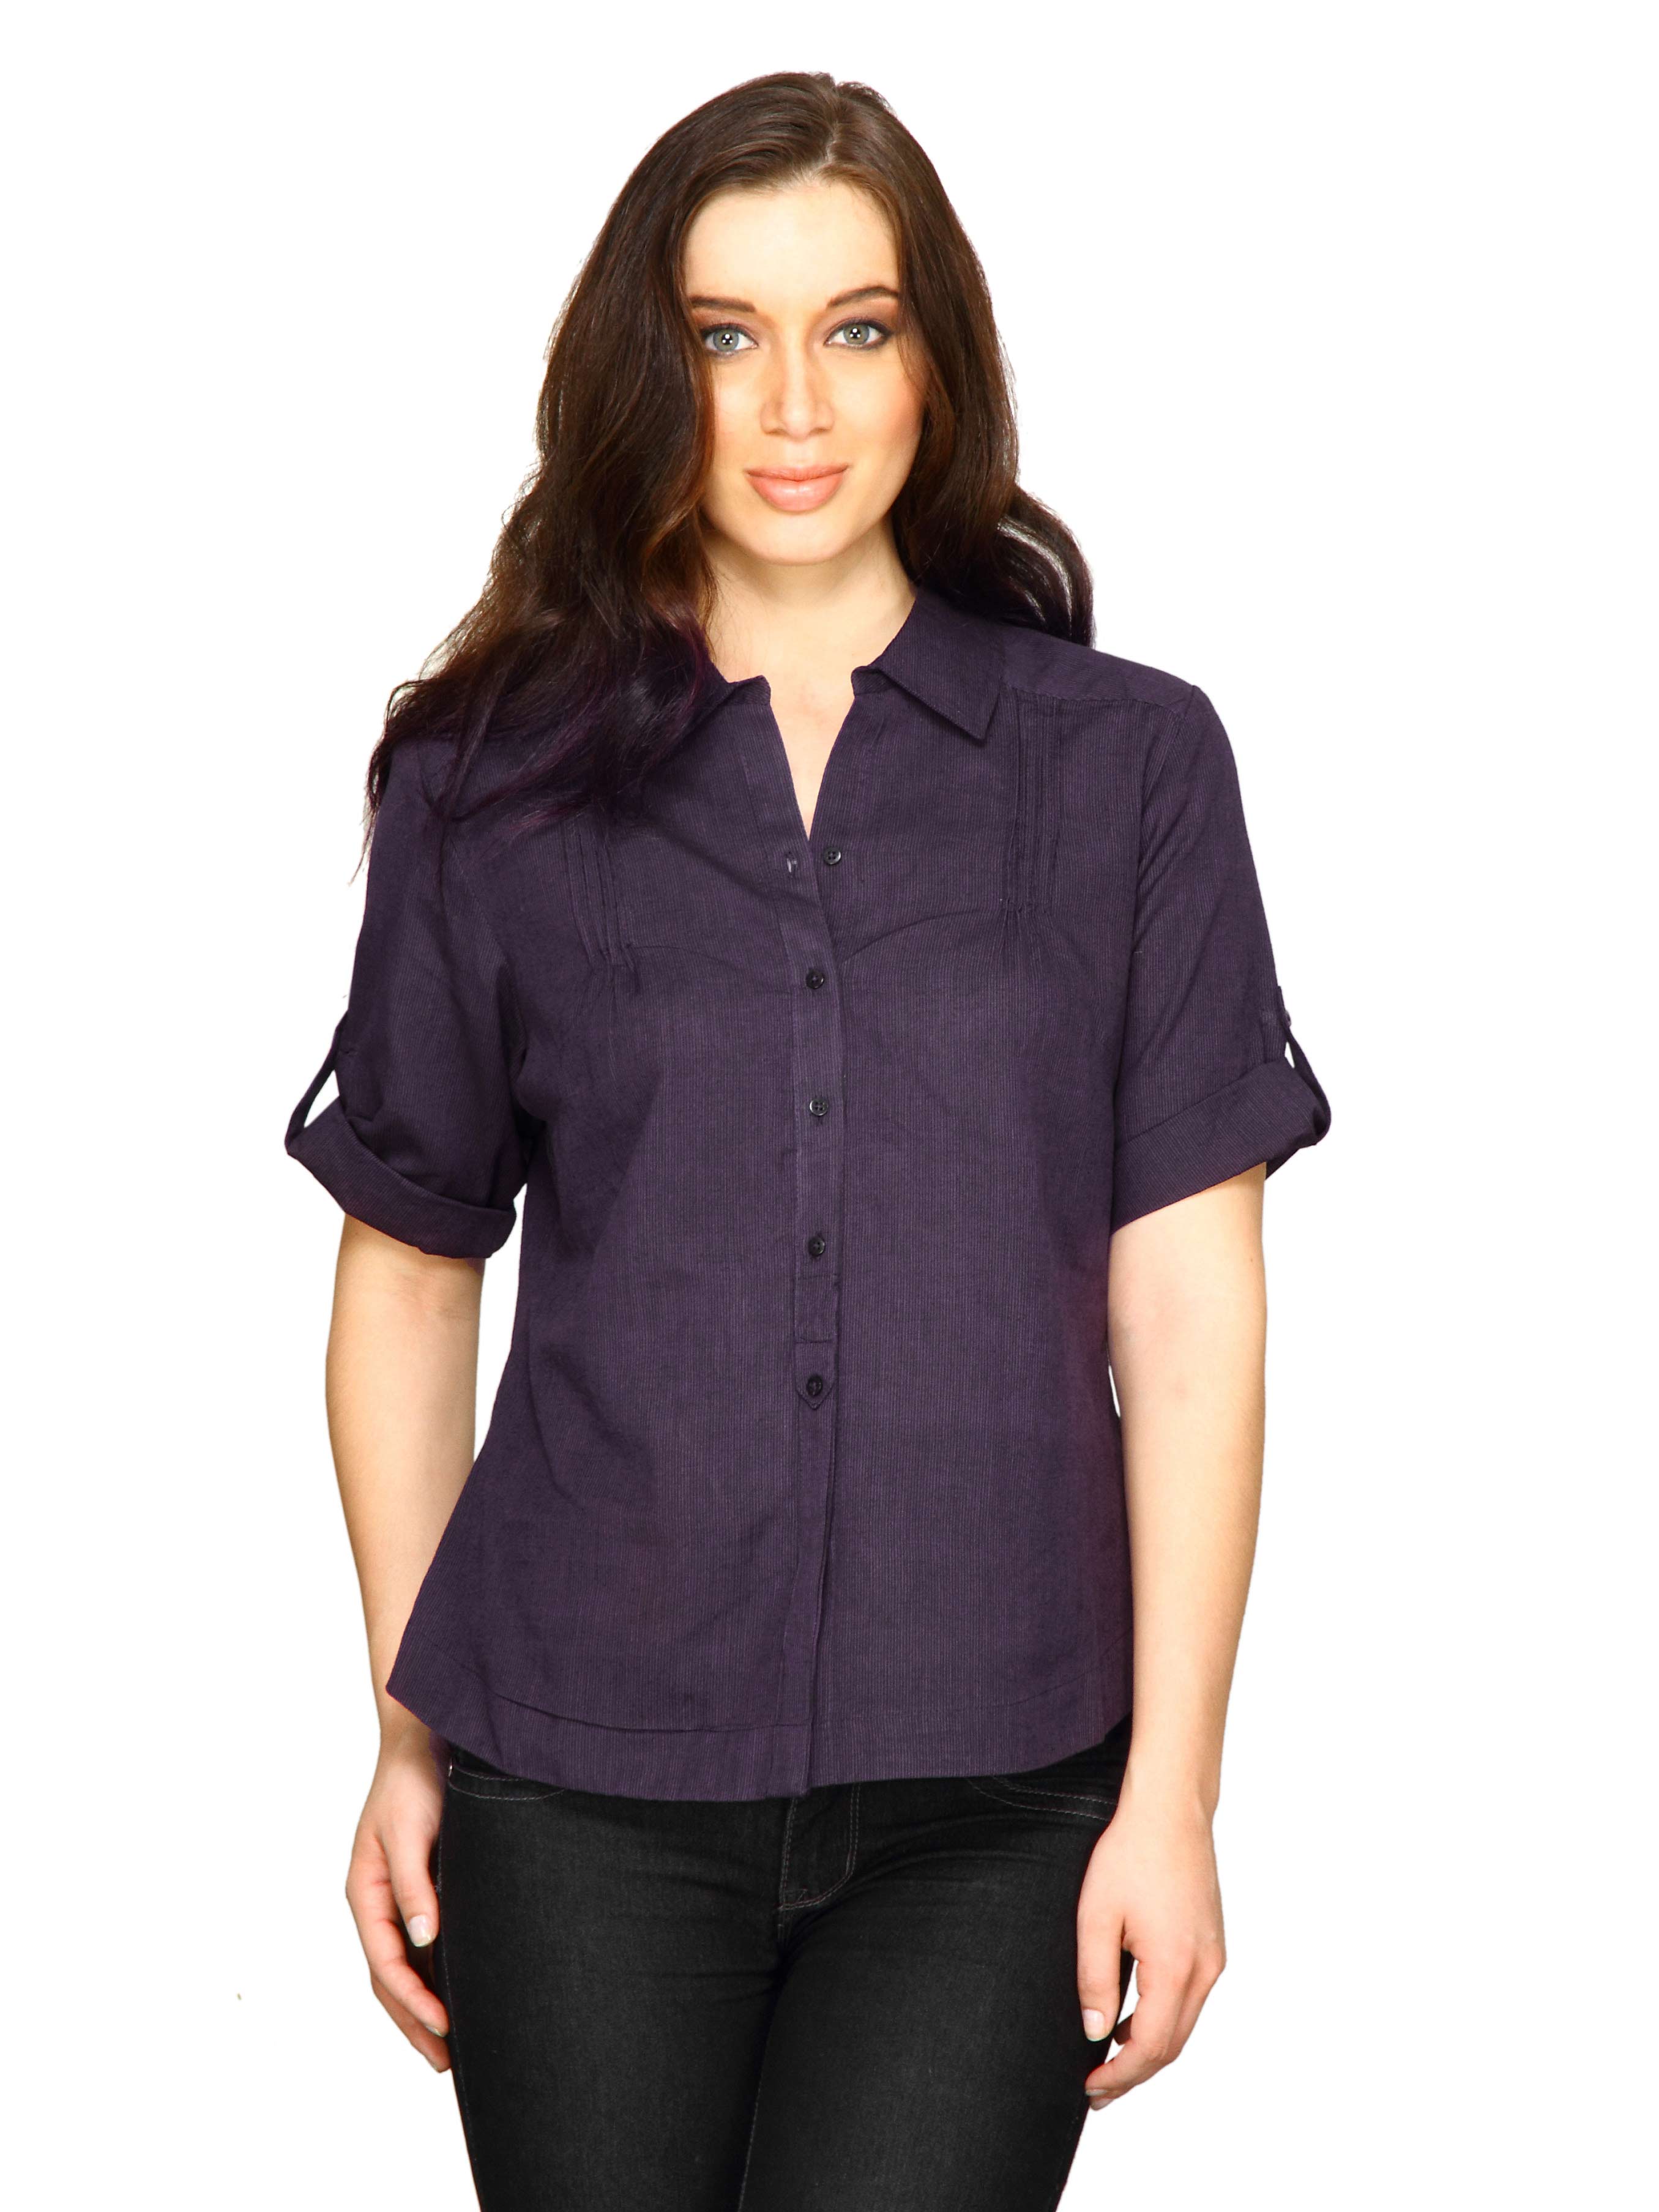 Scullers For Her Women Wow Woven Purple Shirts